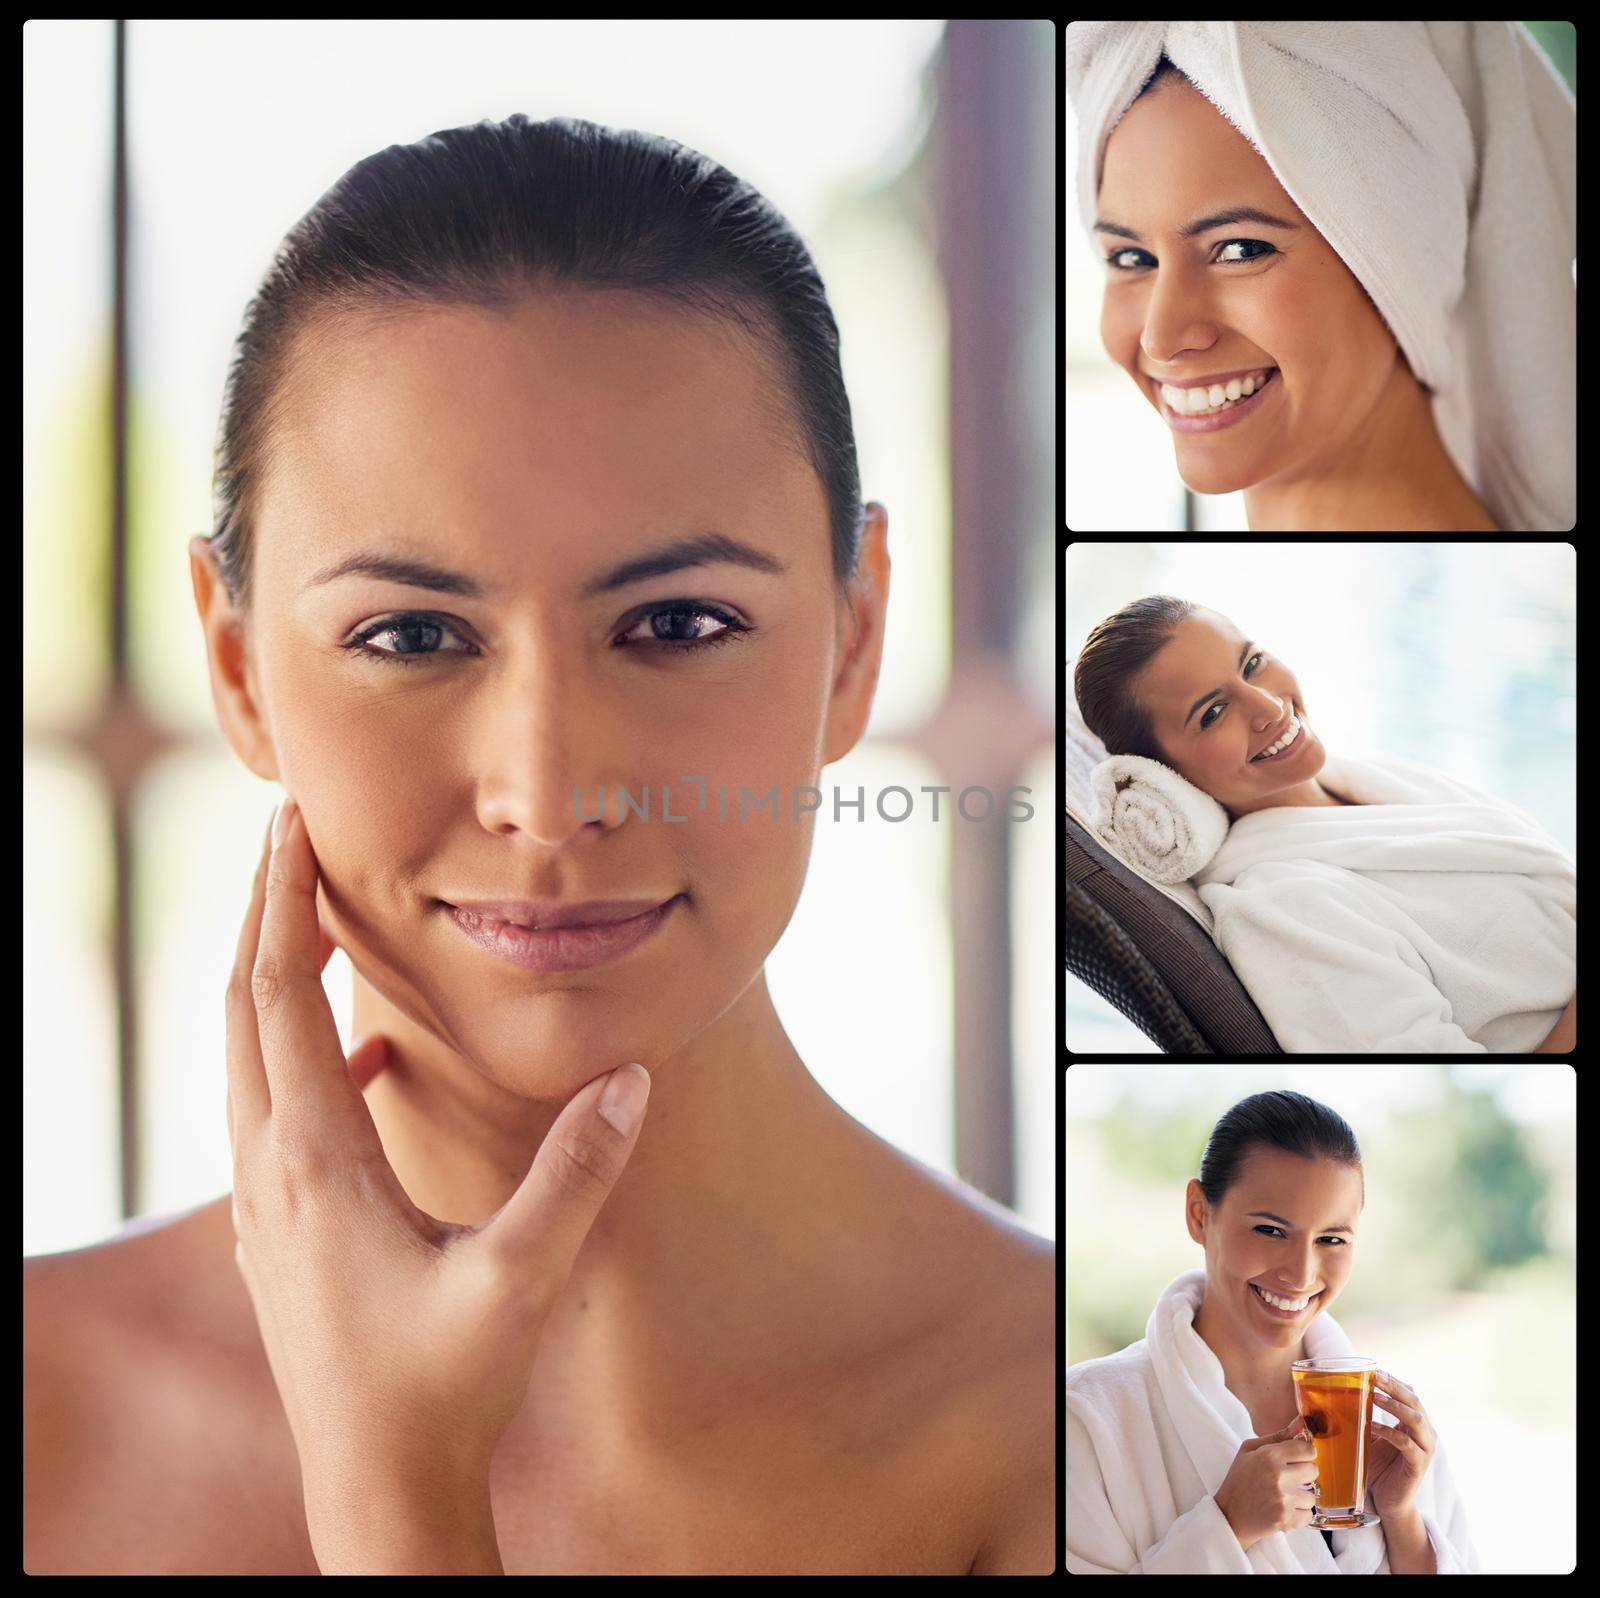 Treat yourself to a day of beauty and relaxation. Composite image of an attractive young woman in a beauty spa